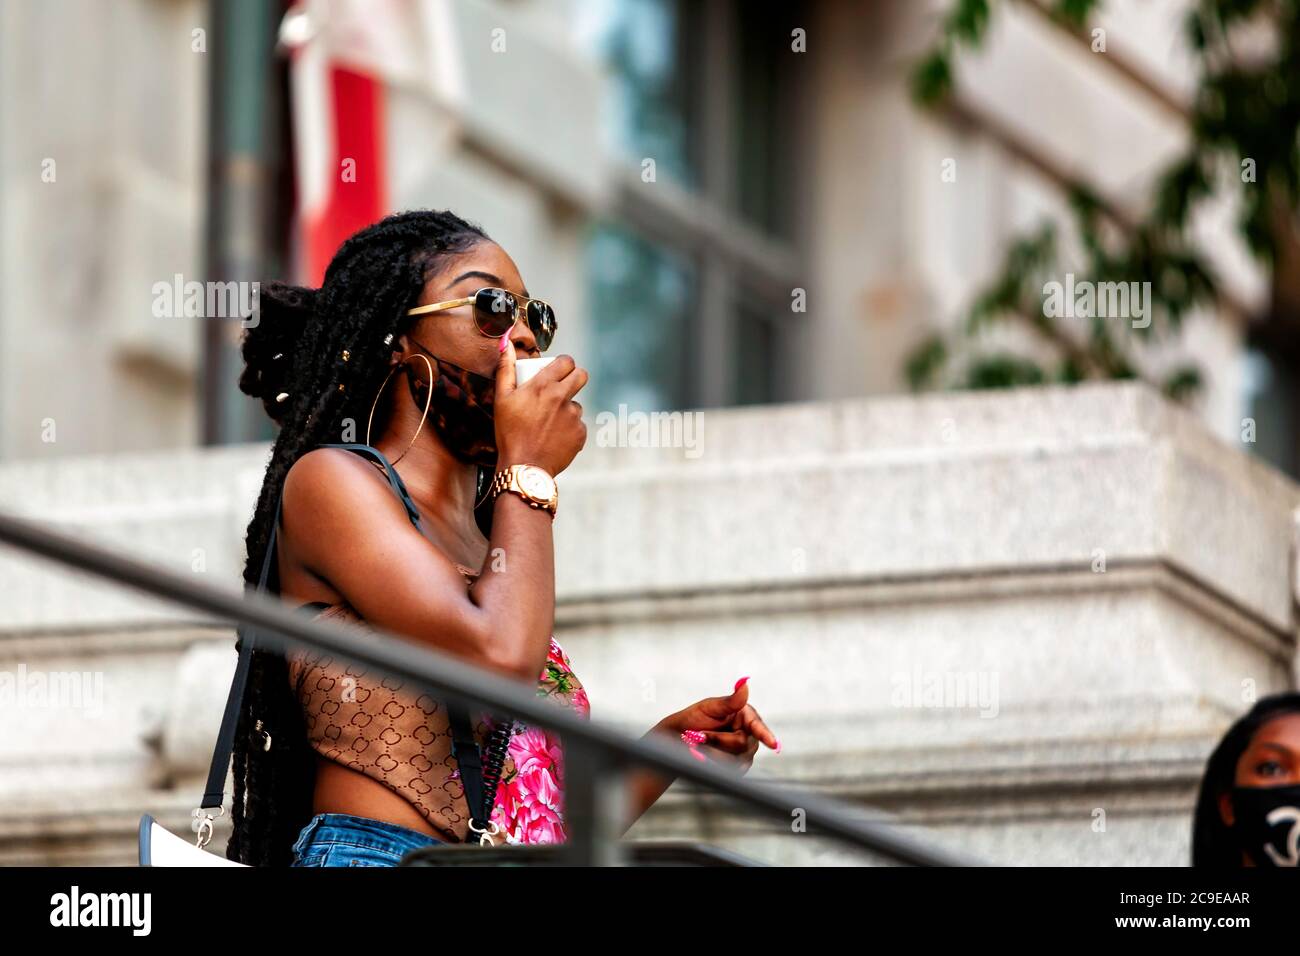 Aalayah Eastmond of Concerned Citizens of DC speaks to protesters at the Wilson building, home of the Washington City Council, DC, United States Stock Photo